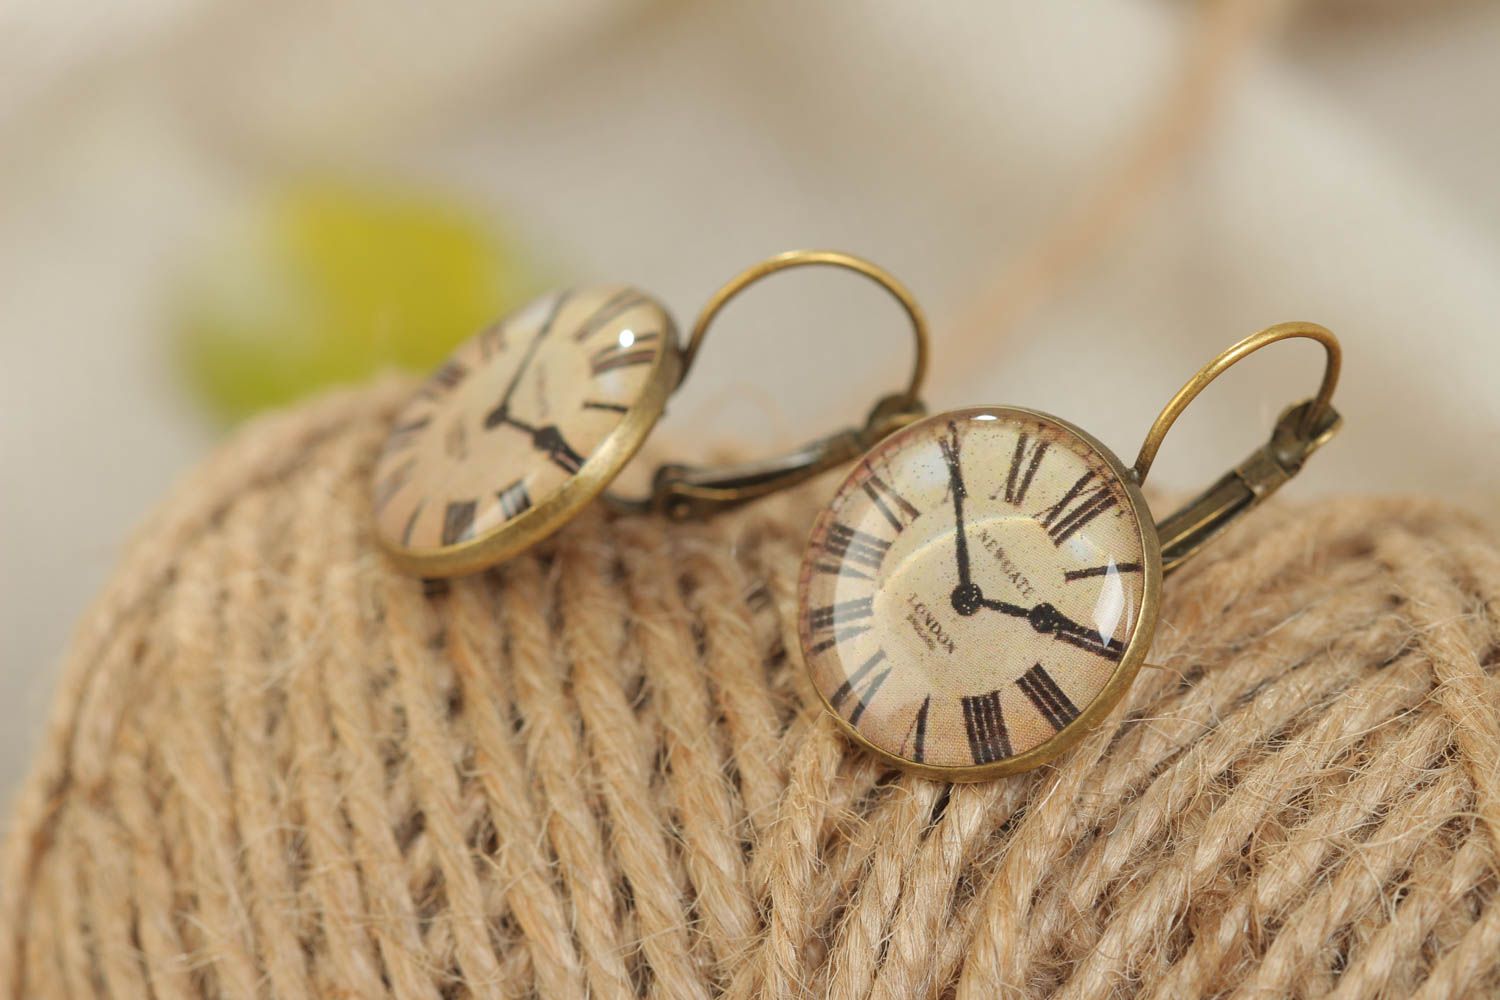 Handmade round earrings with metal basis and image of clocks in glass glaze photo 1